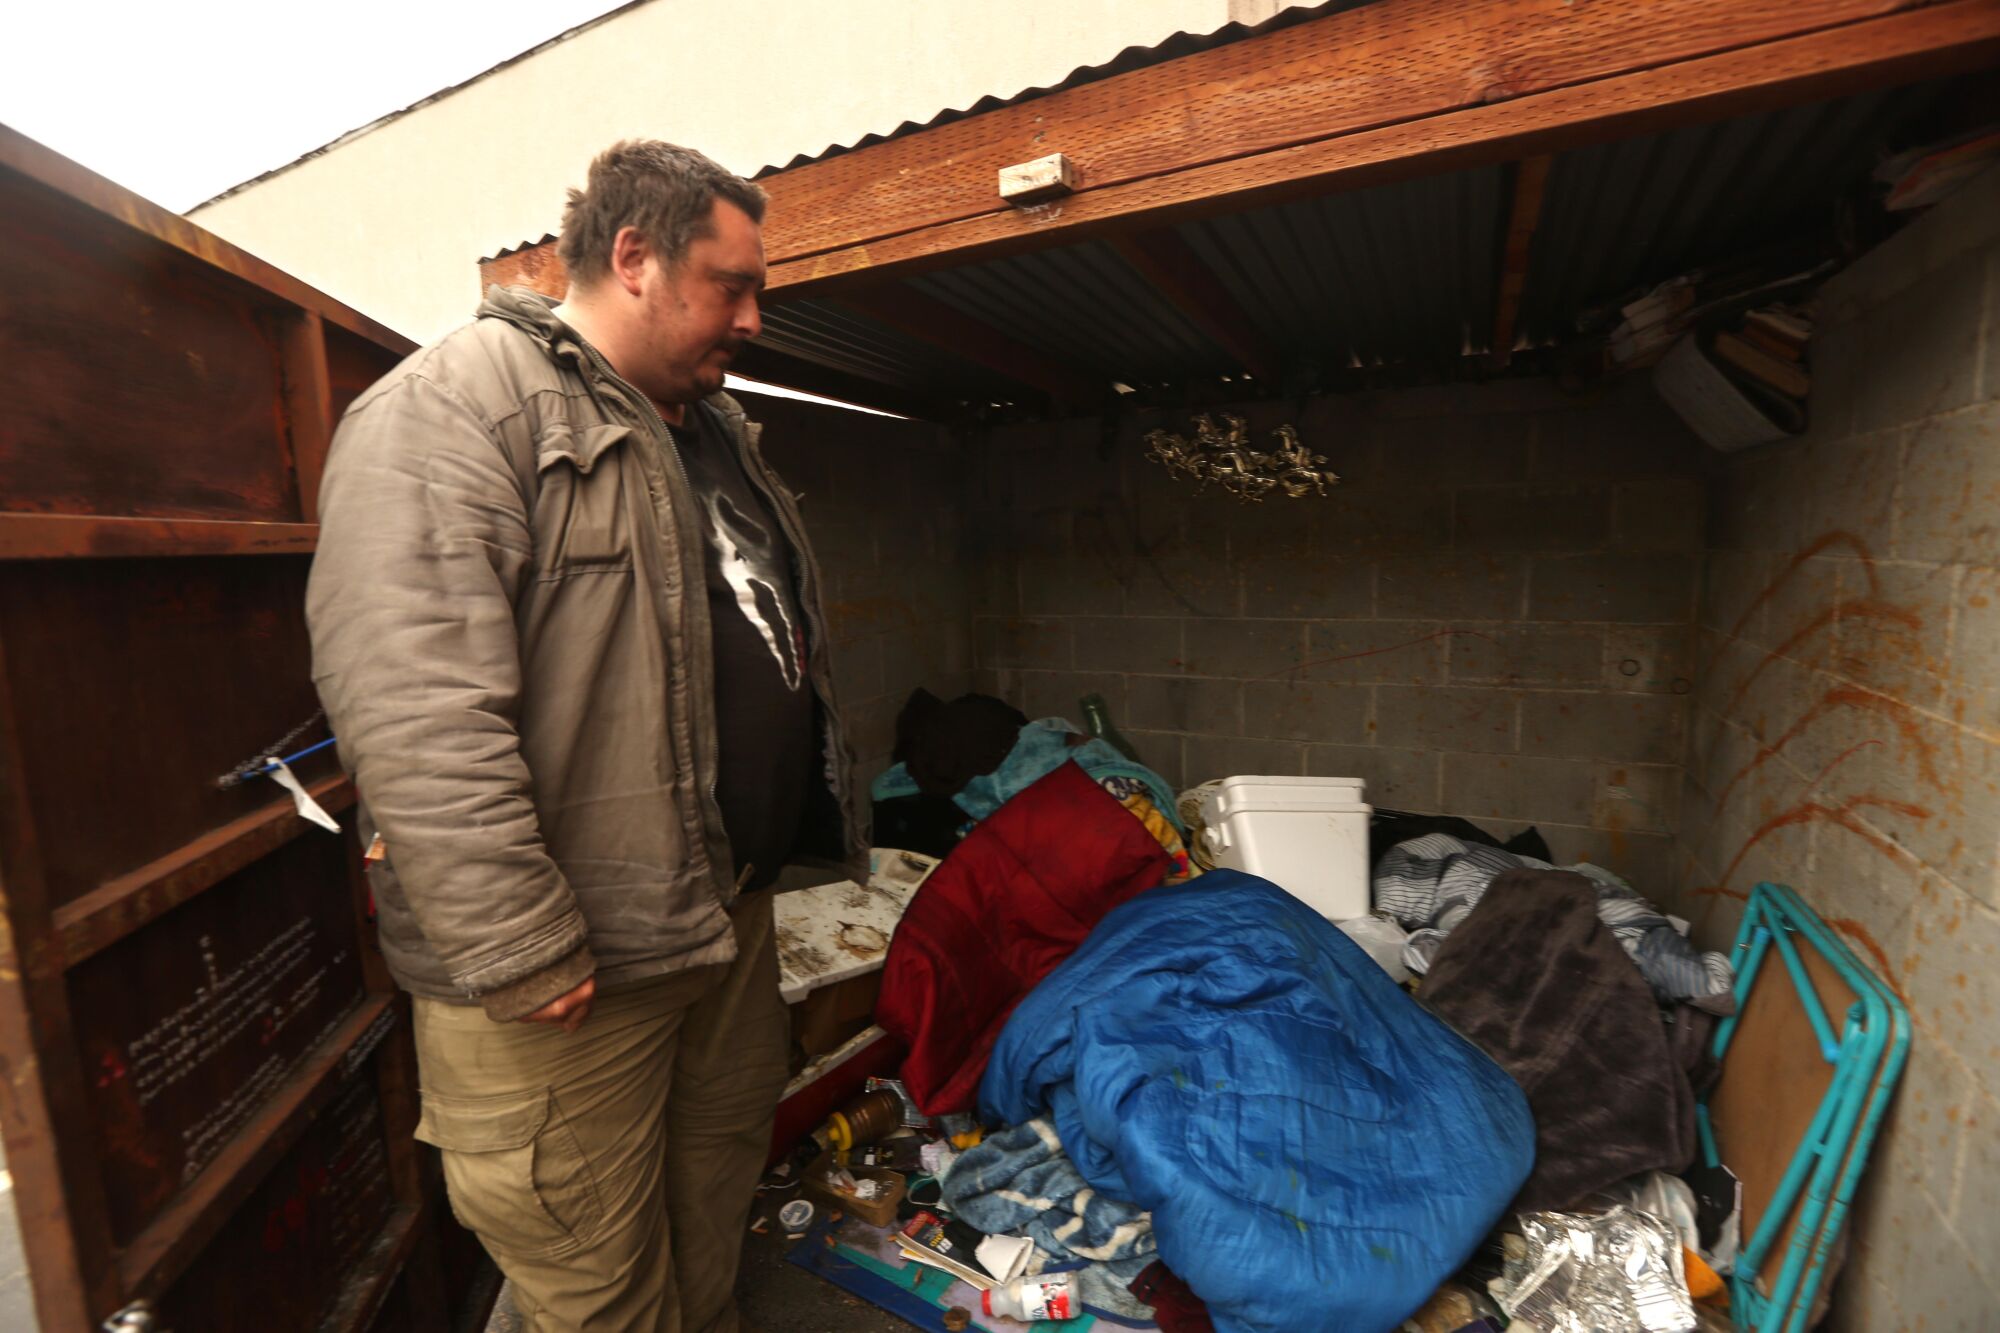 Andrew Truelove stores his two worn sleeping bags in a structure that once housed a garbage dumpster.